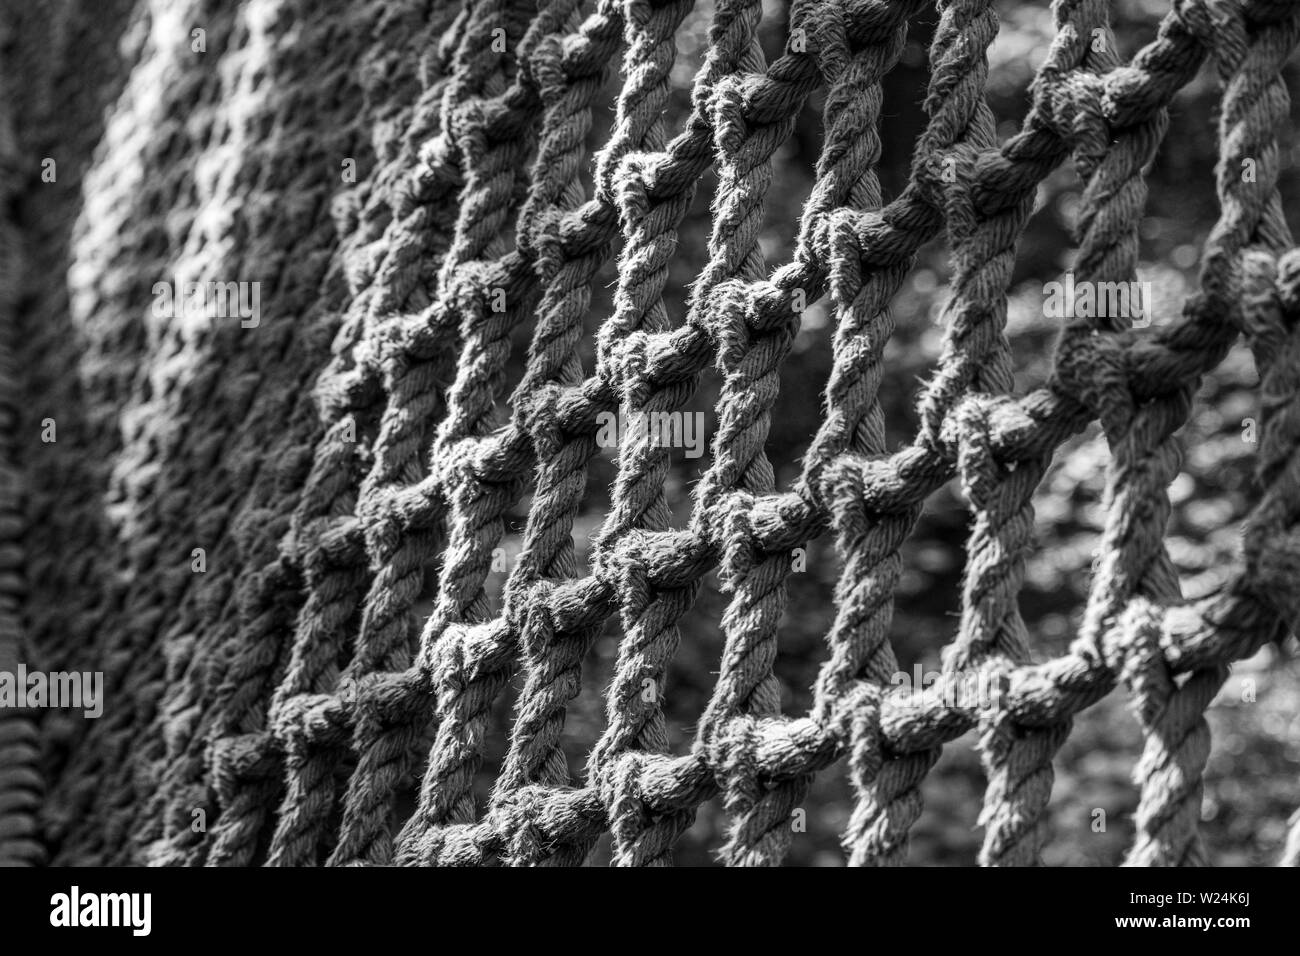 Black and white closeup view of ropes tied to form netting in an abstract pattern. Stock Photo